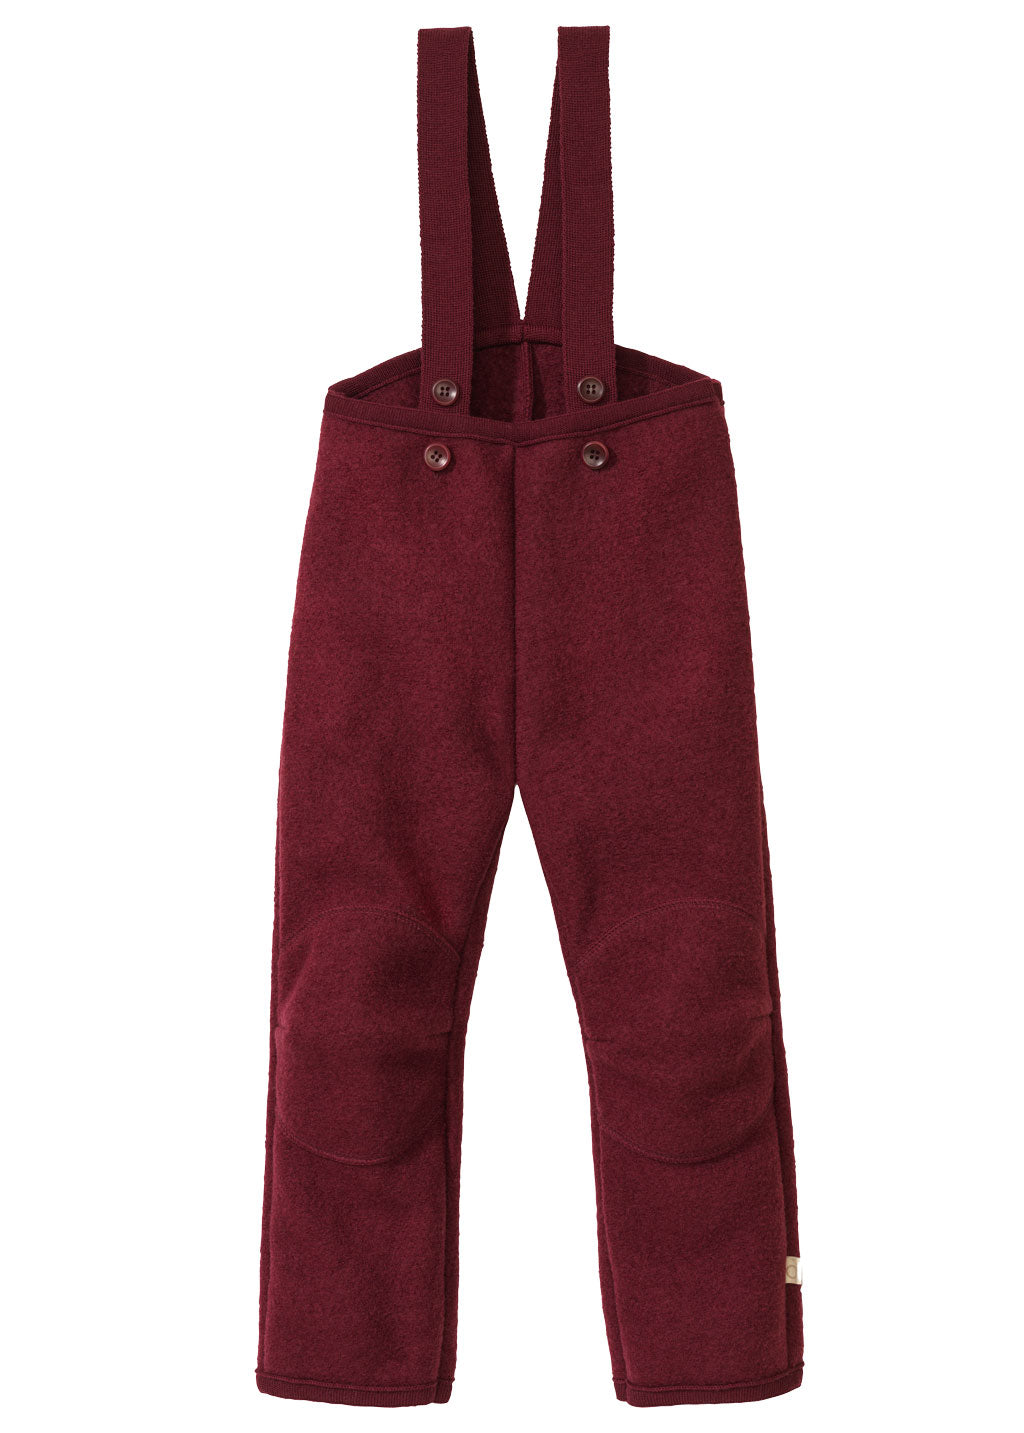 Disana boiled wool trousers in cassis